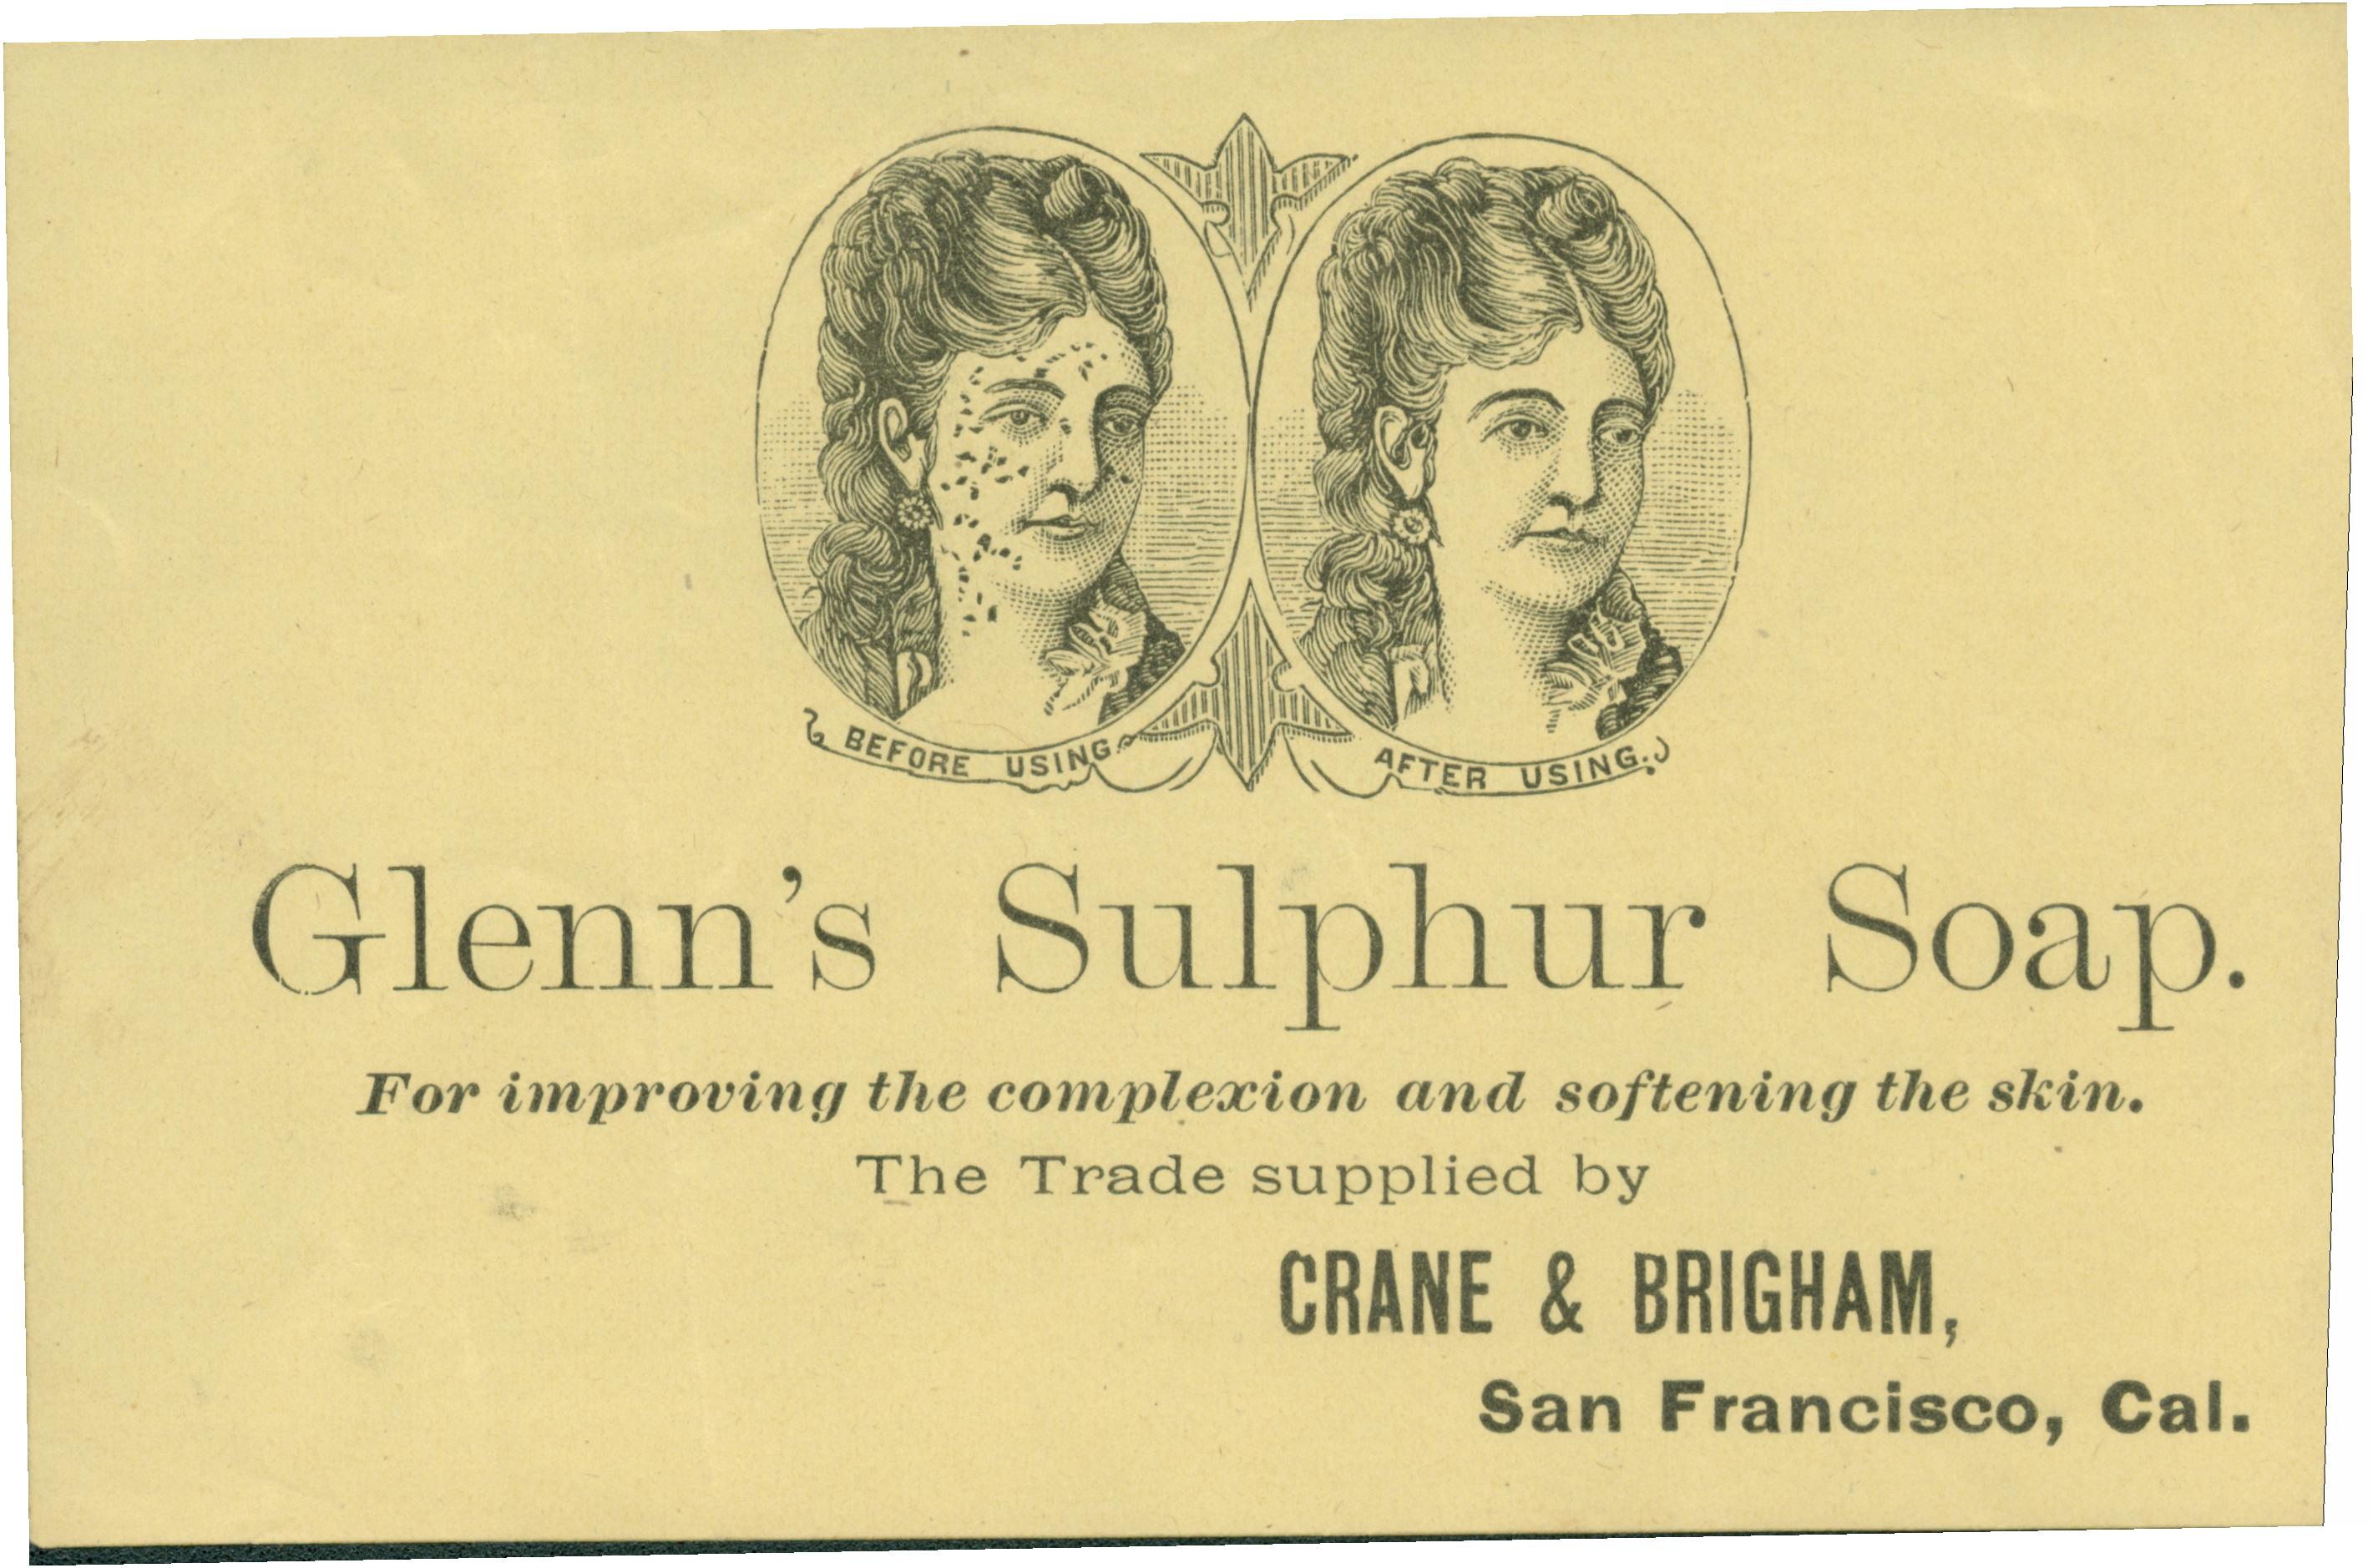 This trade card shows a before and after engraving of a woman who used sulphur soap to clear her complexion. Details about the product are listed below the image.